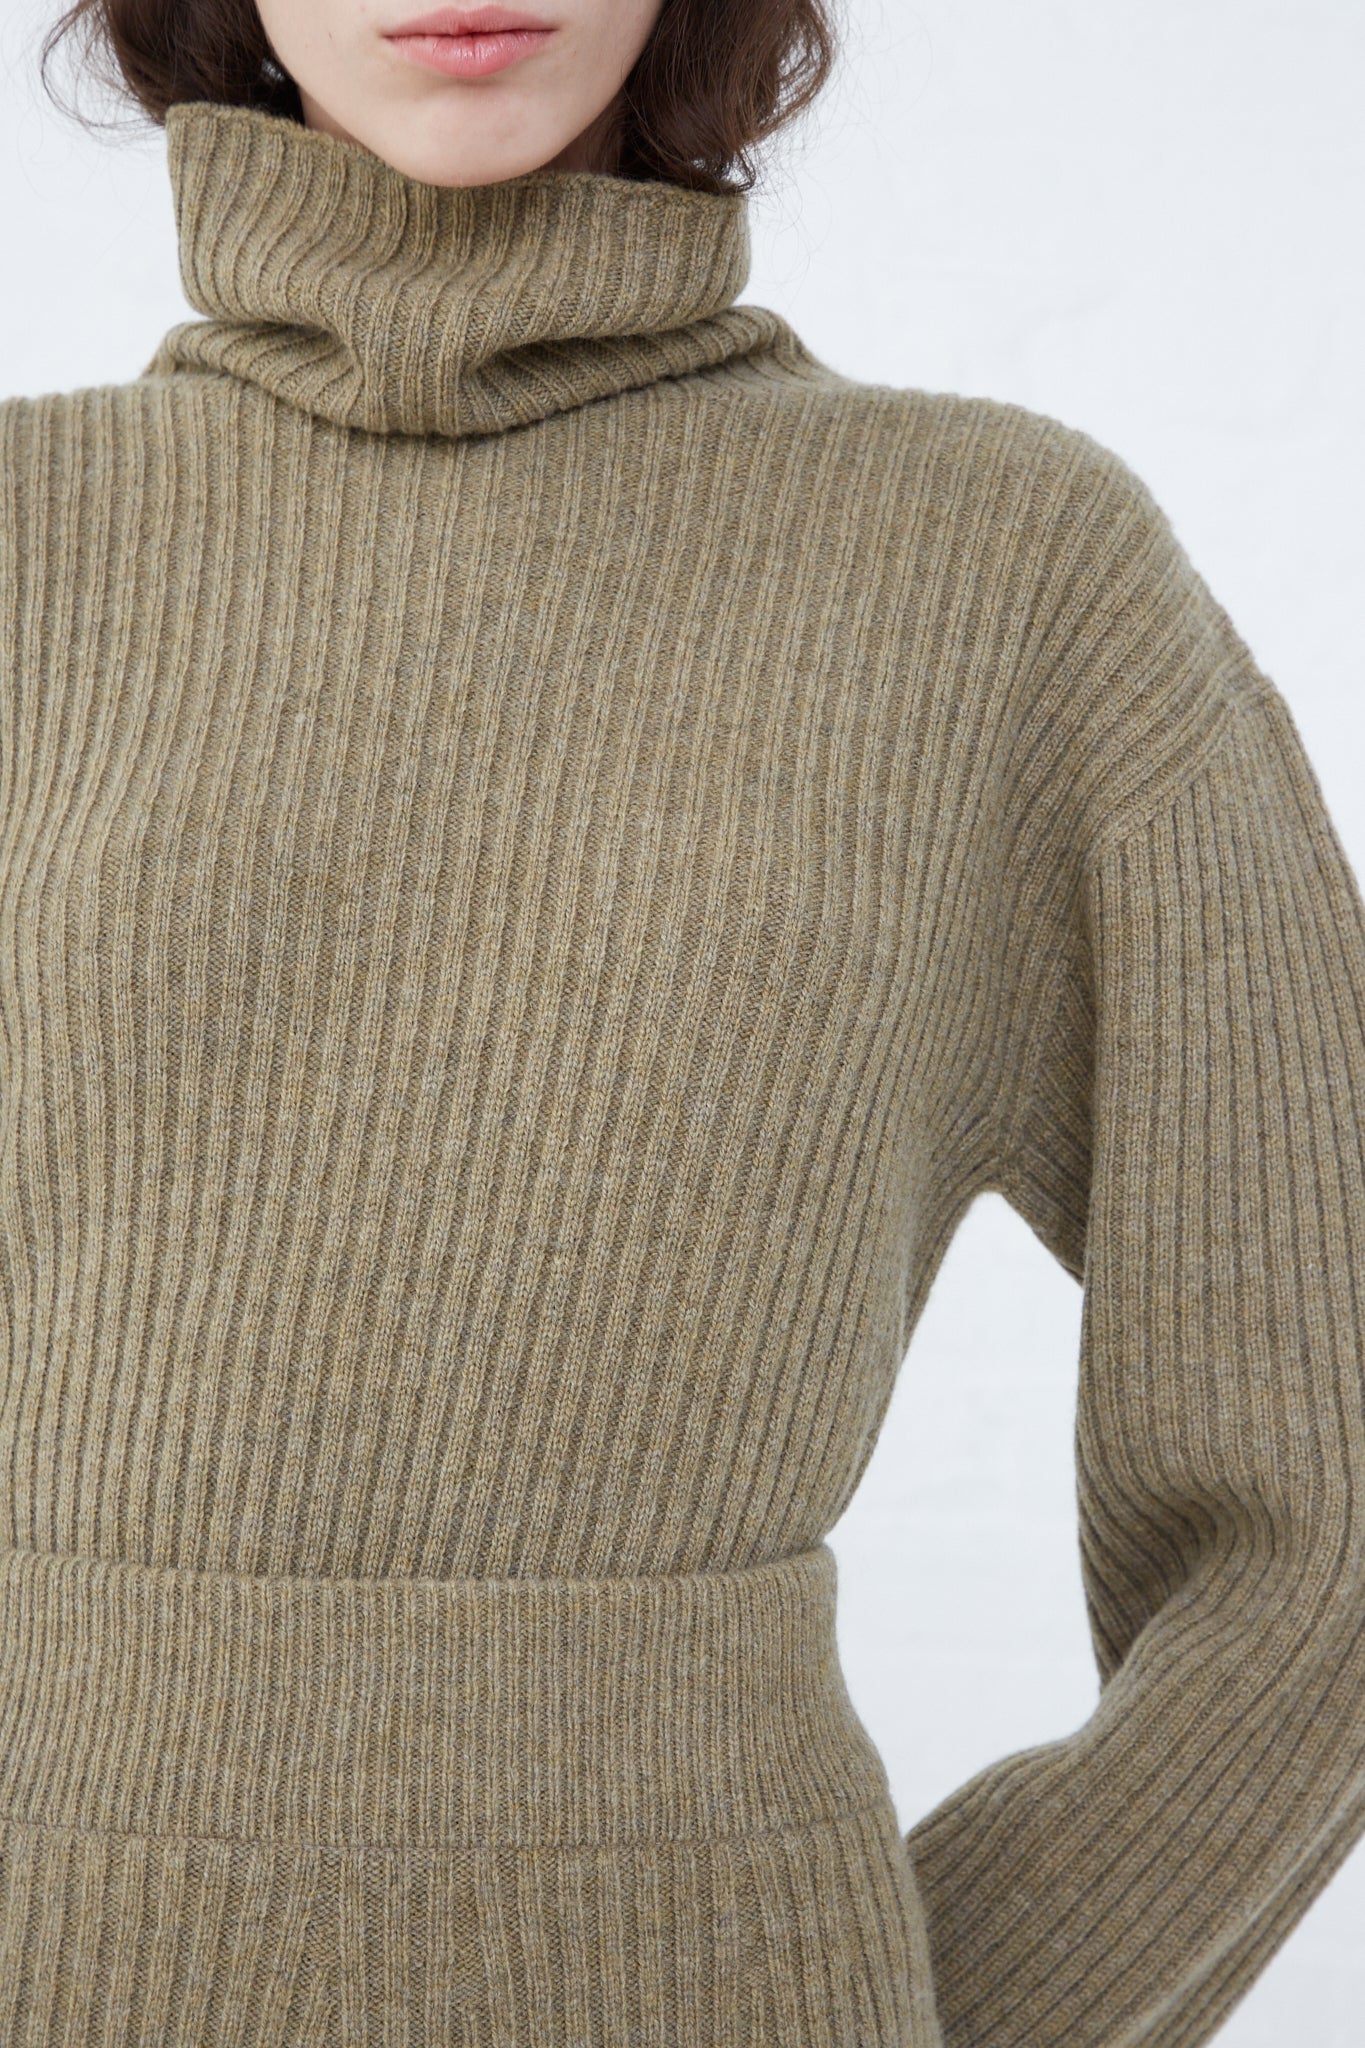 A model wearing a relaxed fit, Wool Rib Knit Turtleneck in Mocha from Ichi Antiquités.